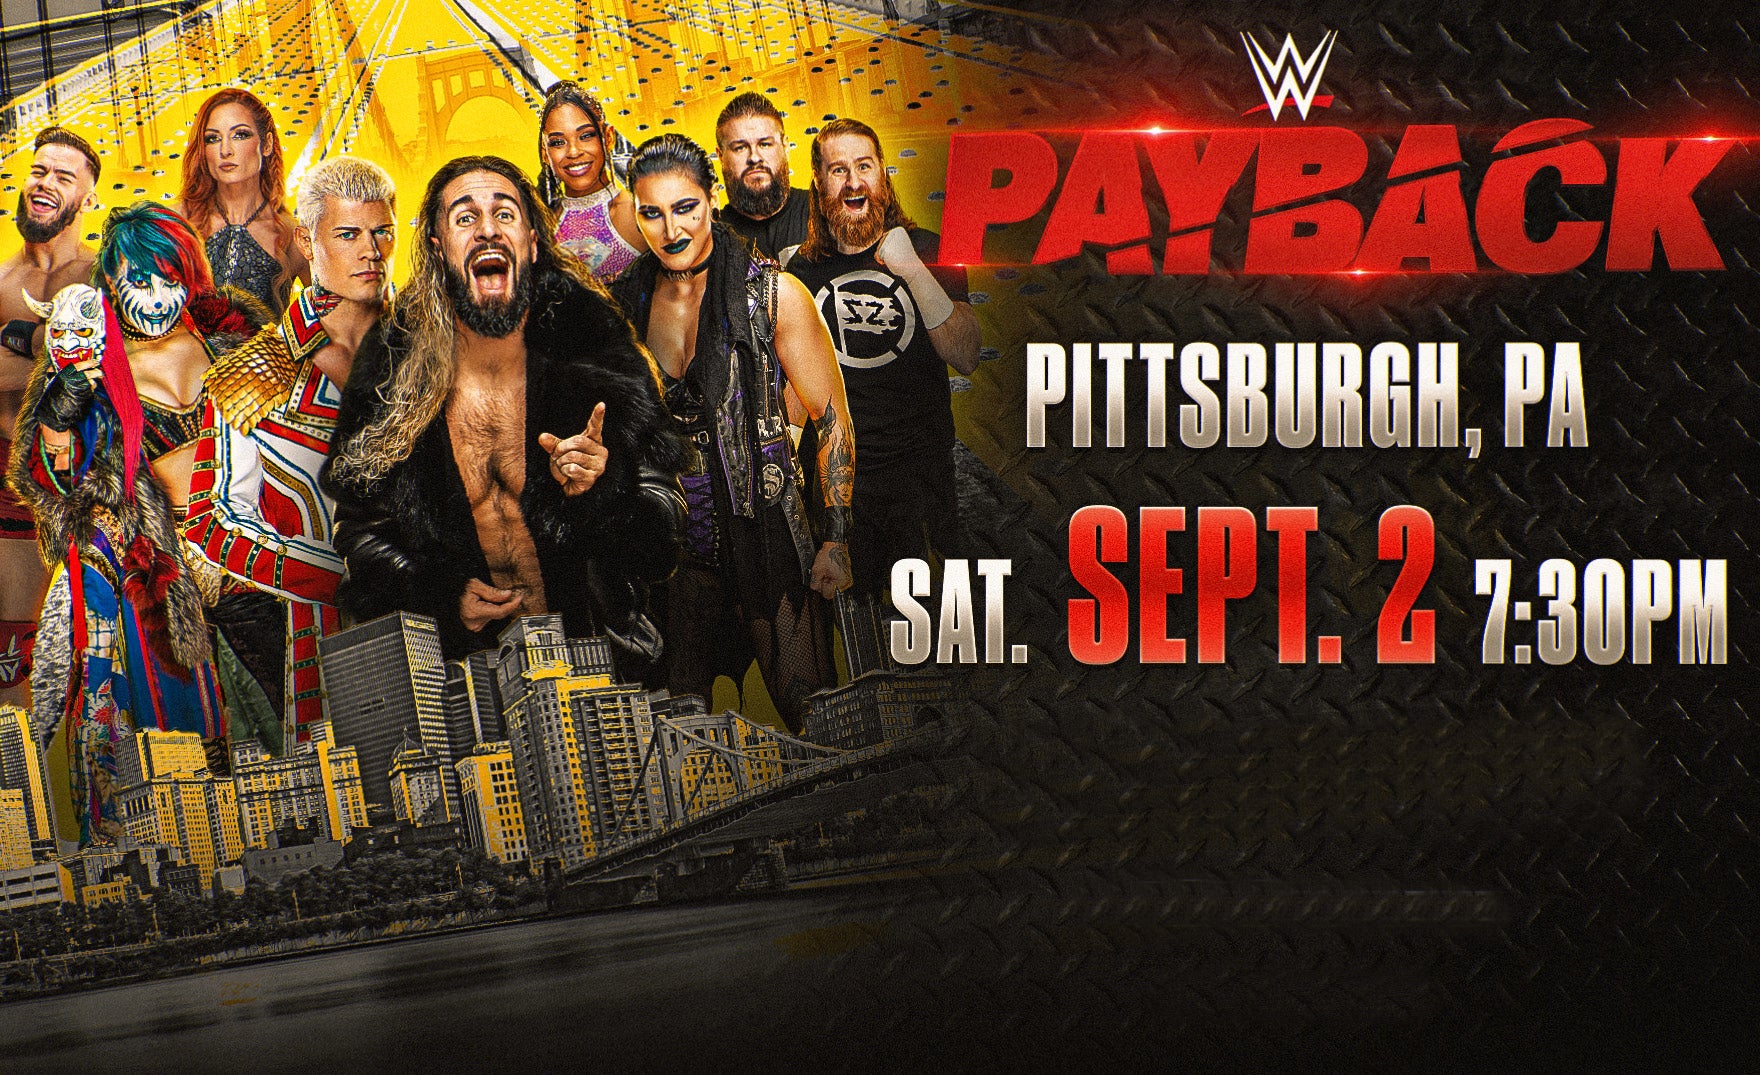 WWE Payback PPG Paints Arena